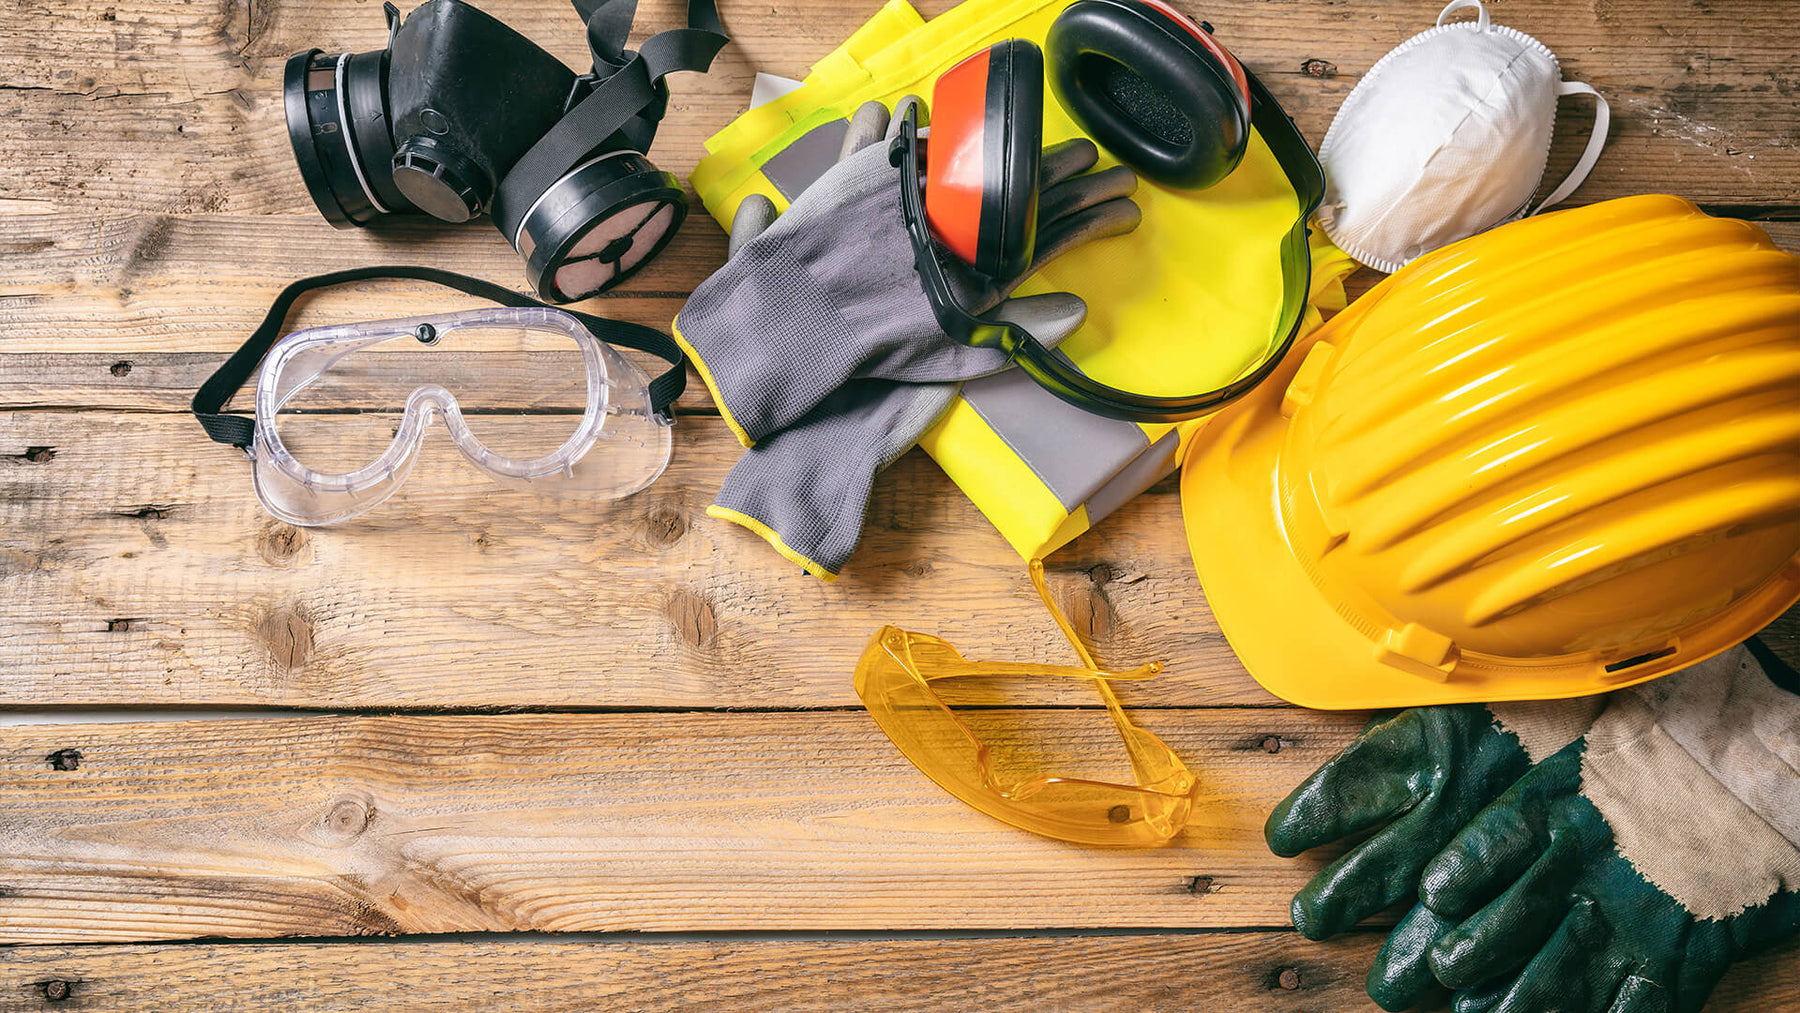 10 Items You Need Every Day in Construction